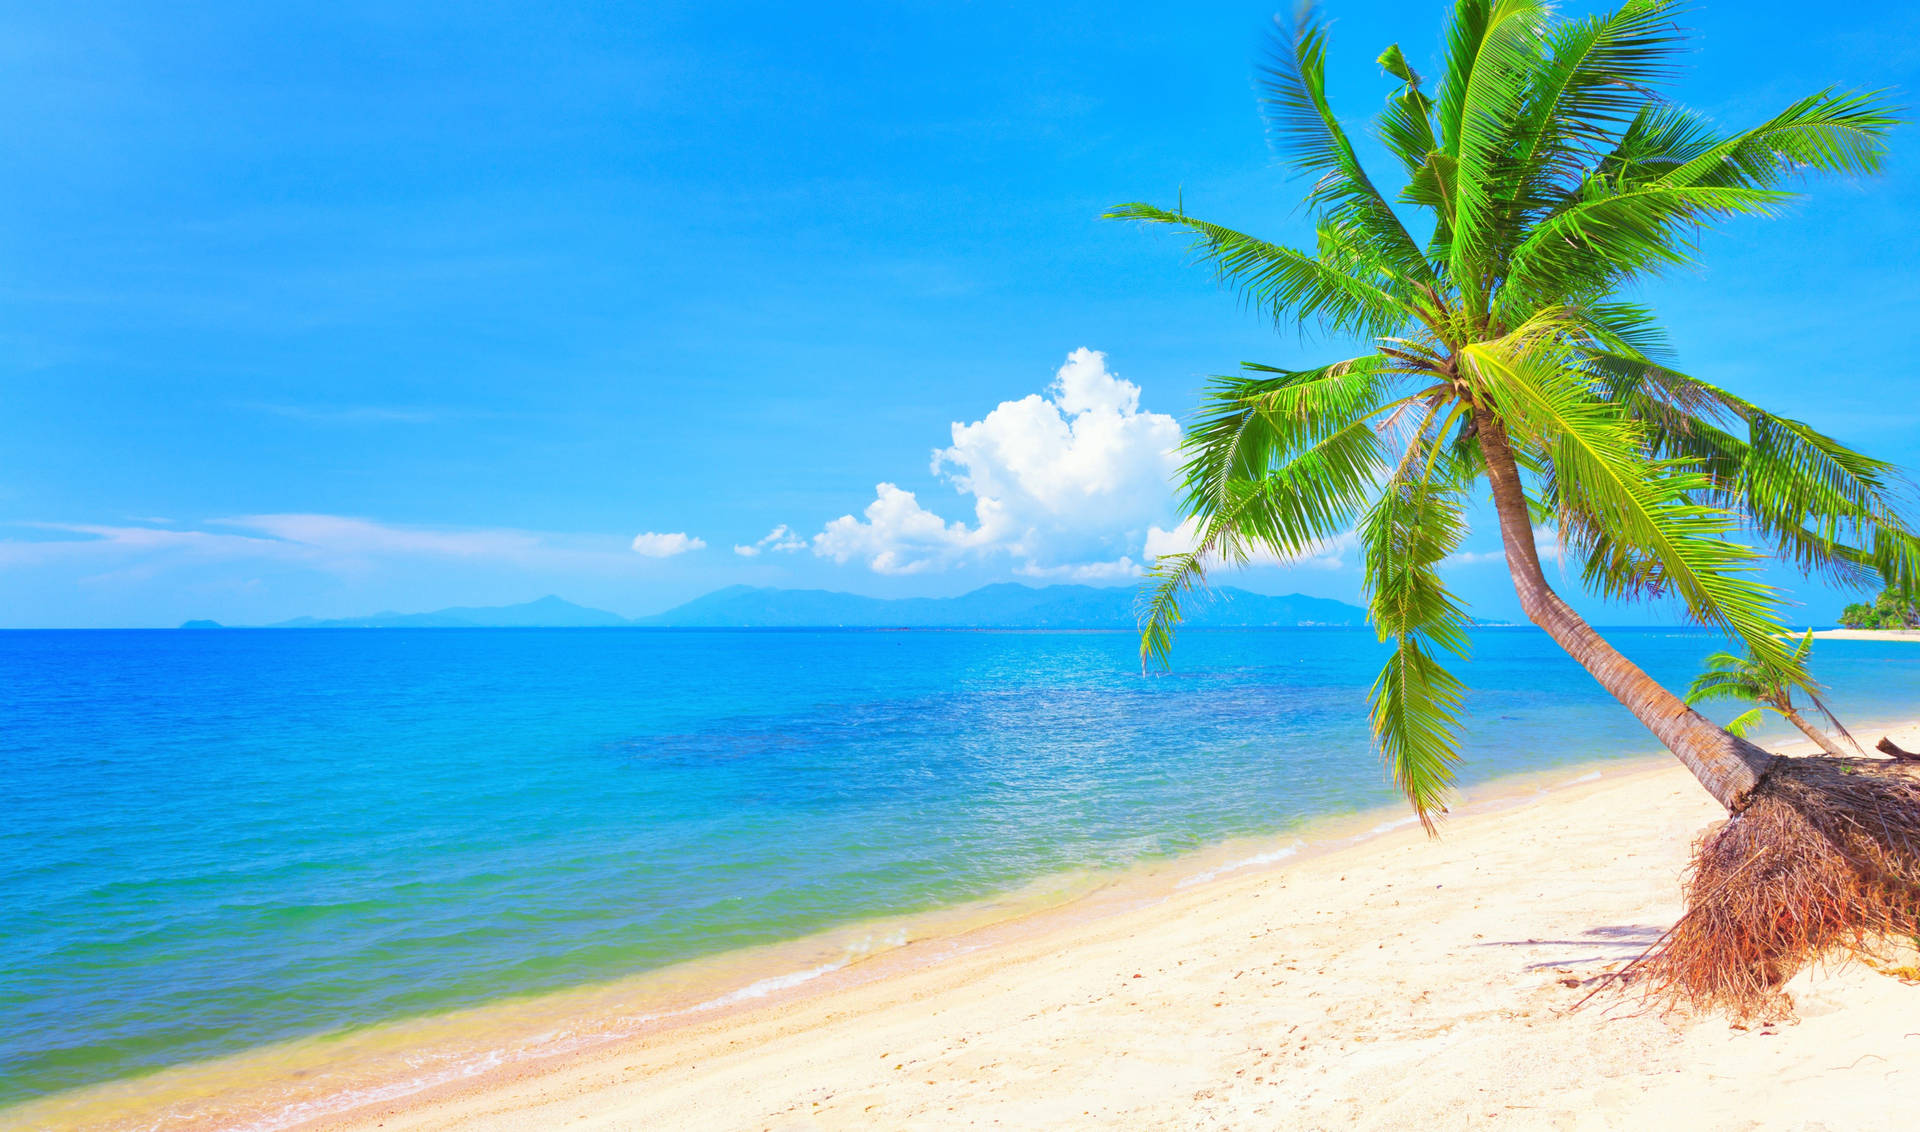 Tropical Beach Turquoise Palm Tree Wallpaper